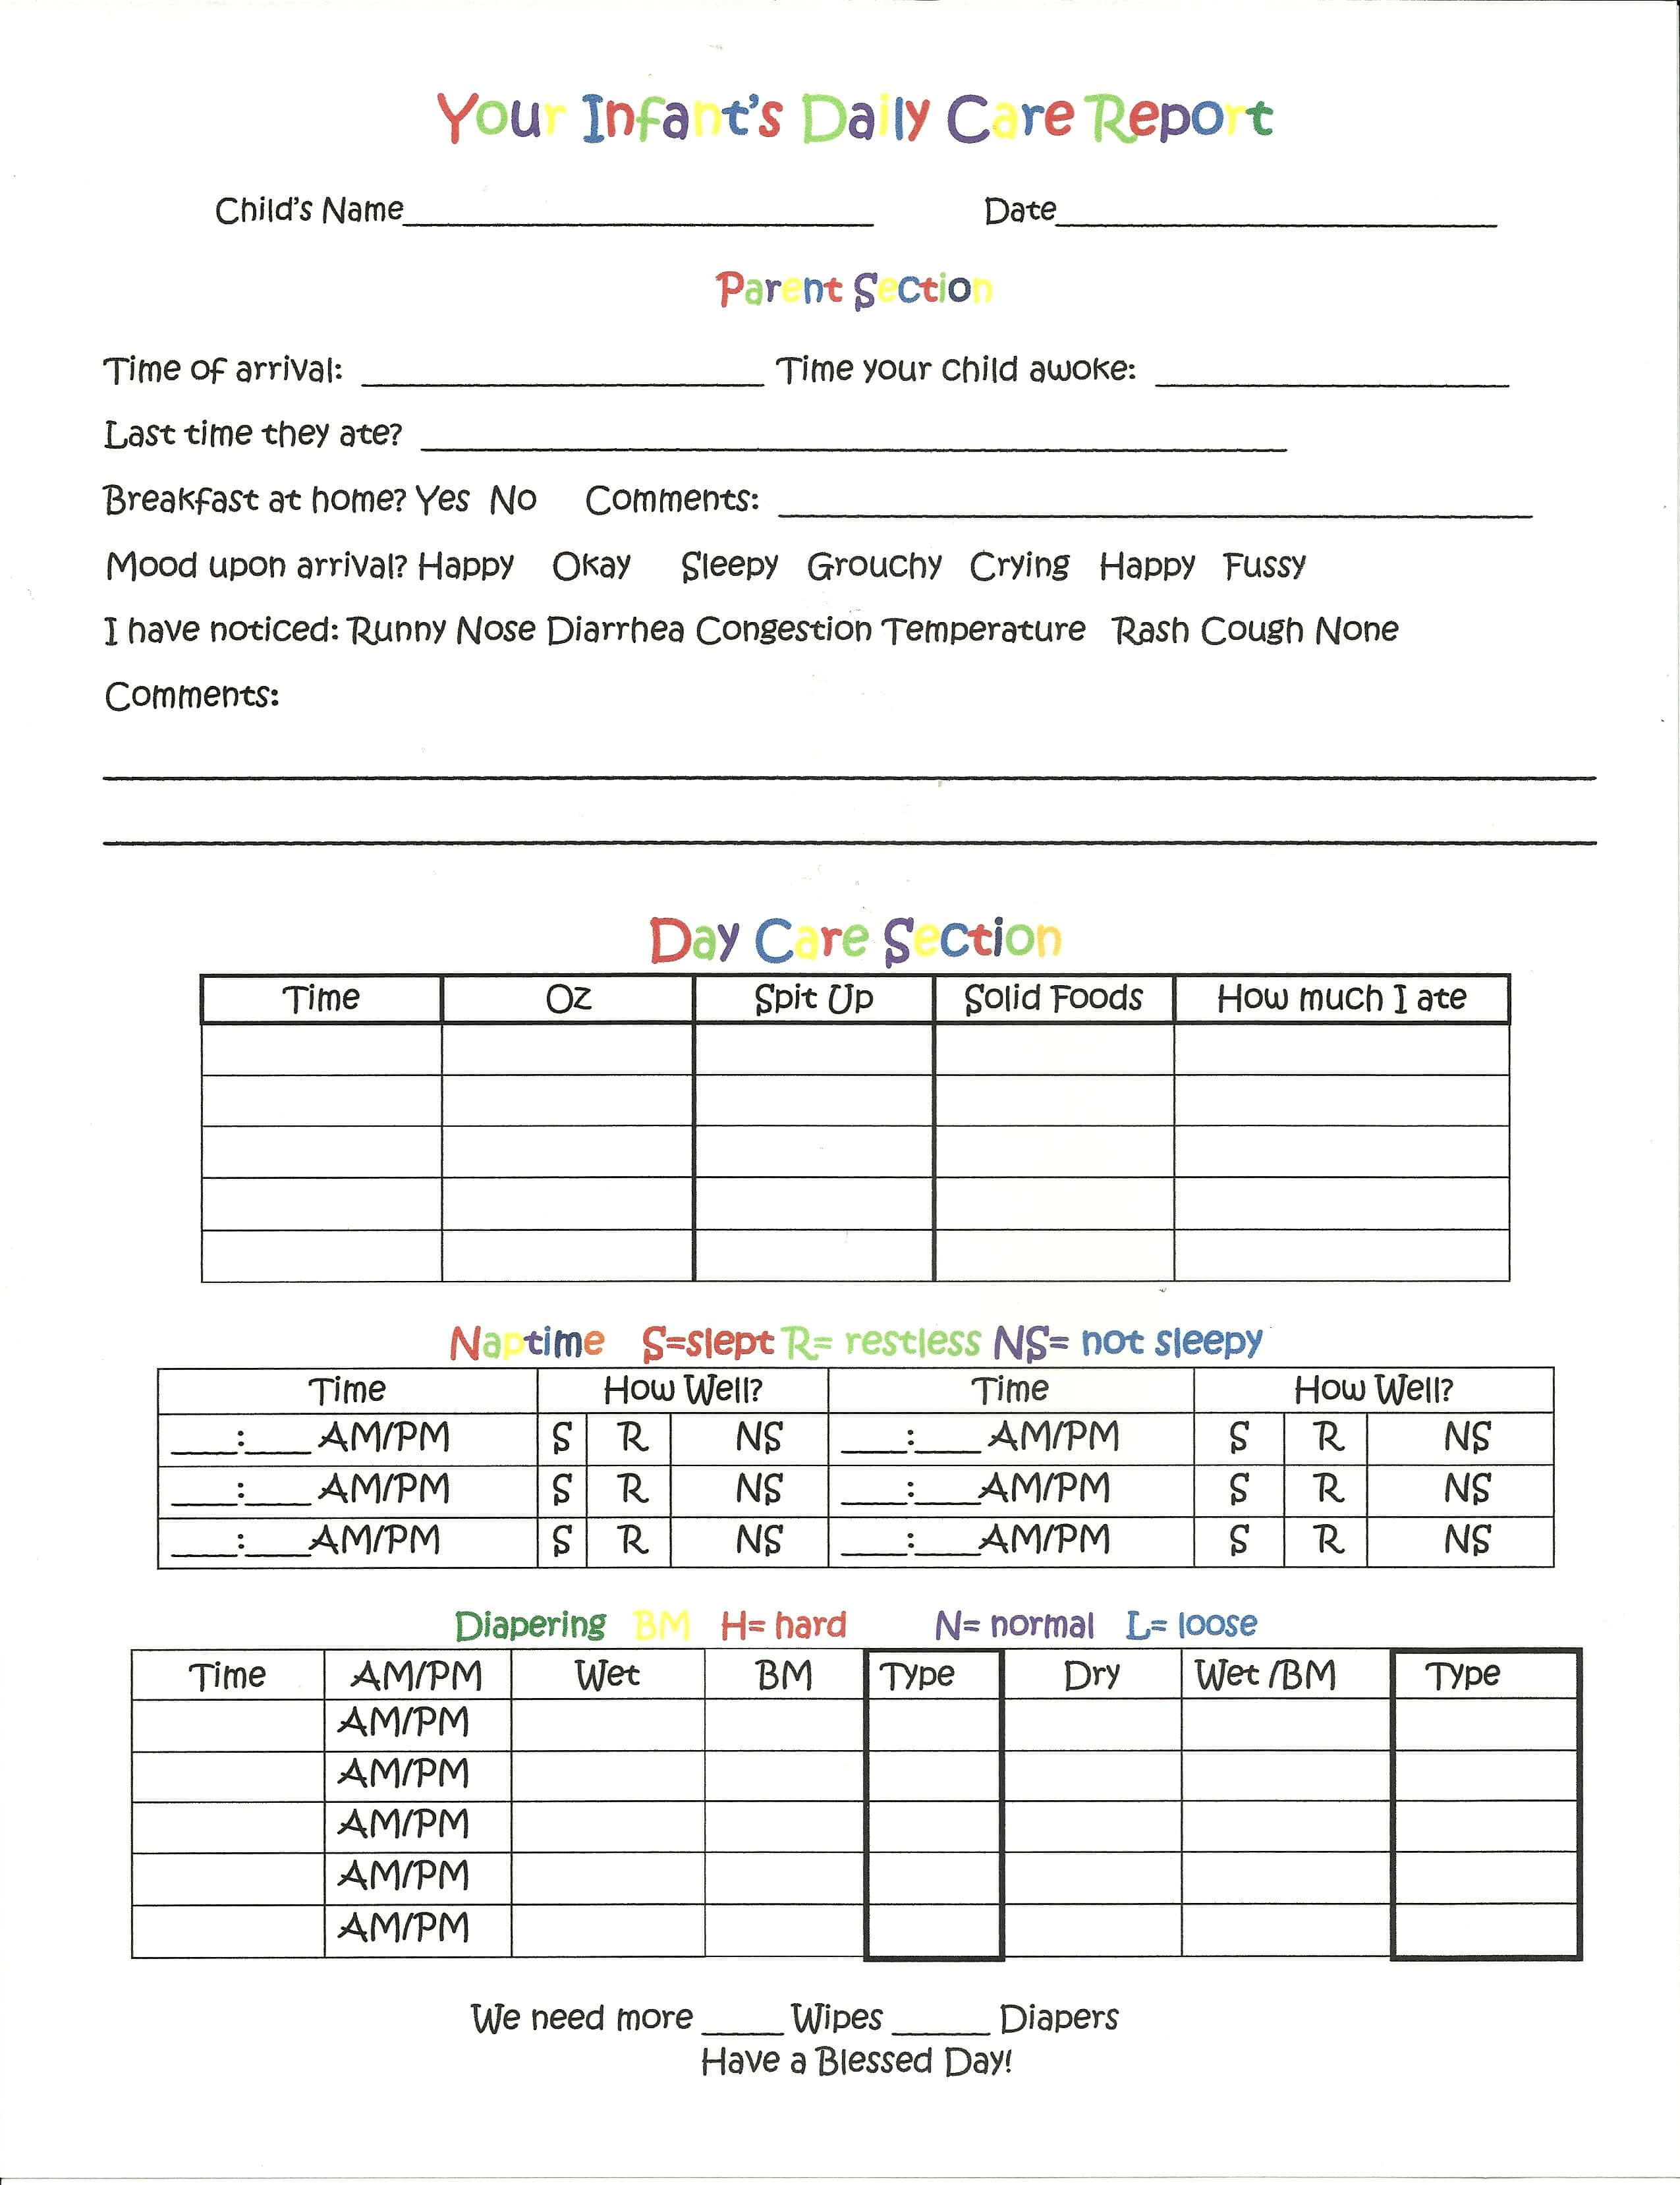 Daily Report For Infants. That I Put Together. | Preschool Inside Daycare Infant Daily Report Template